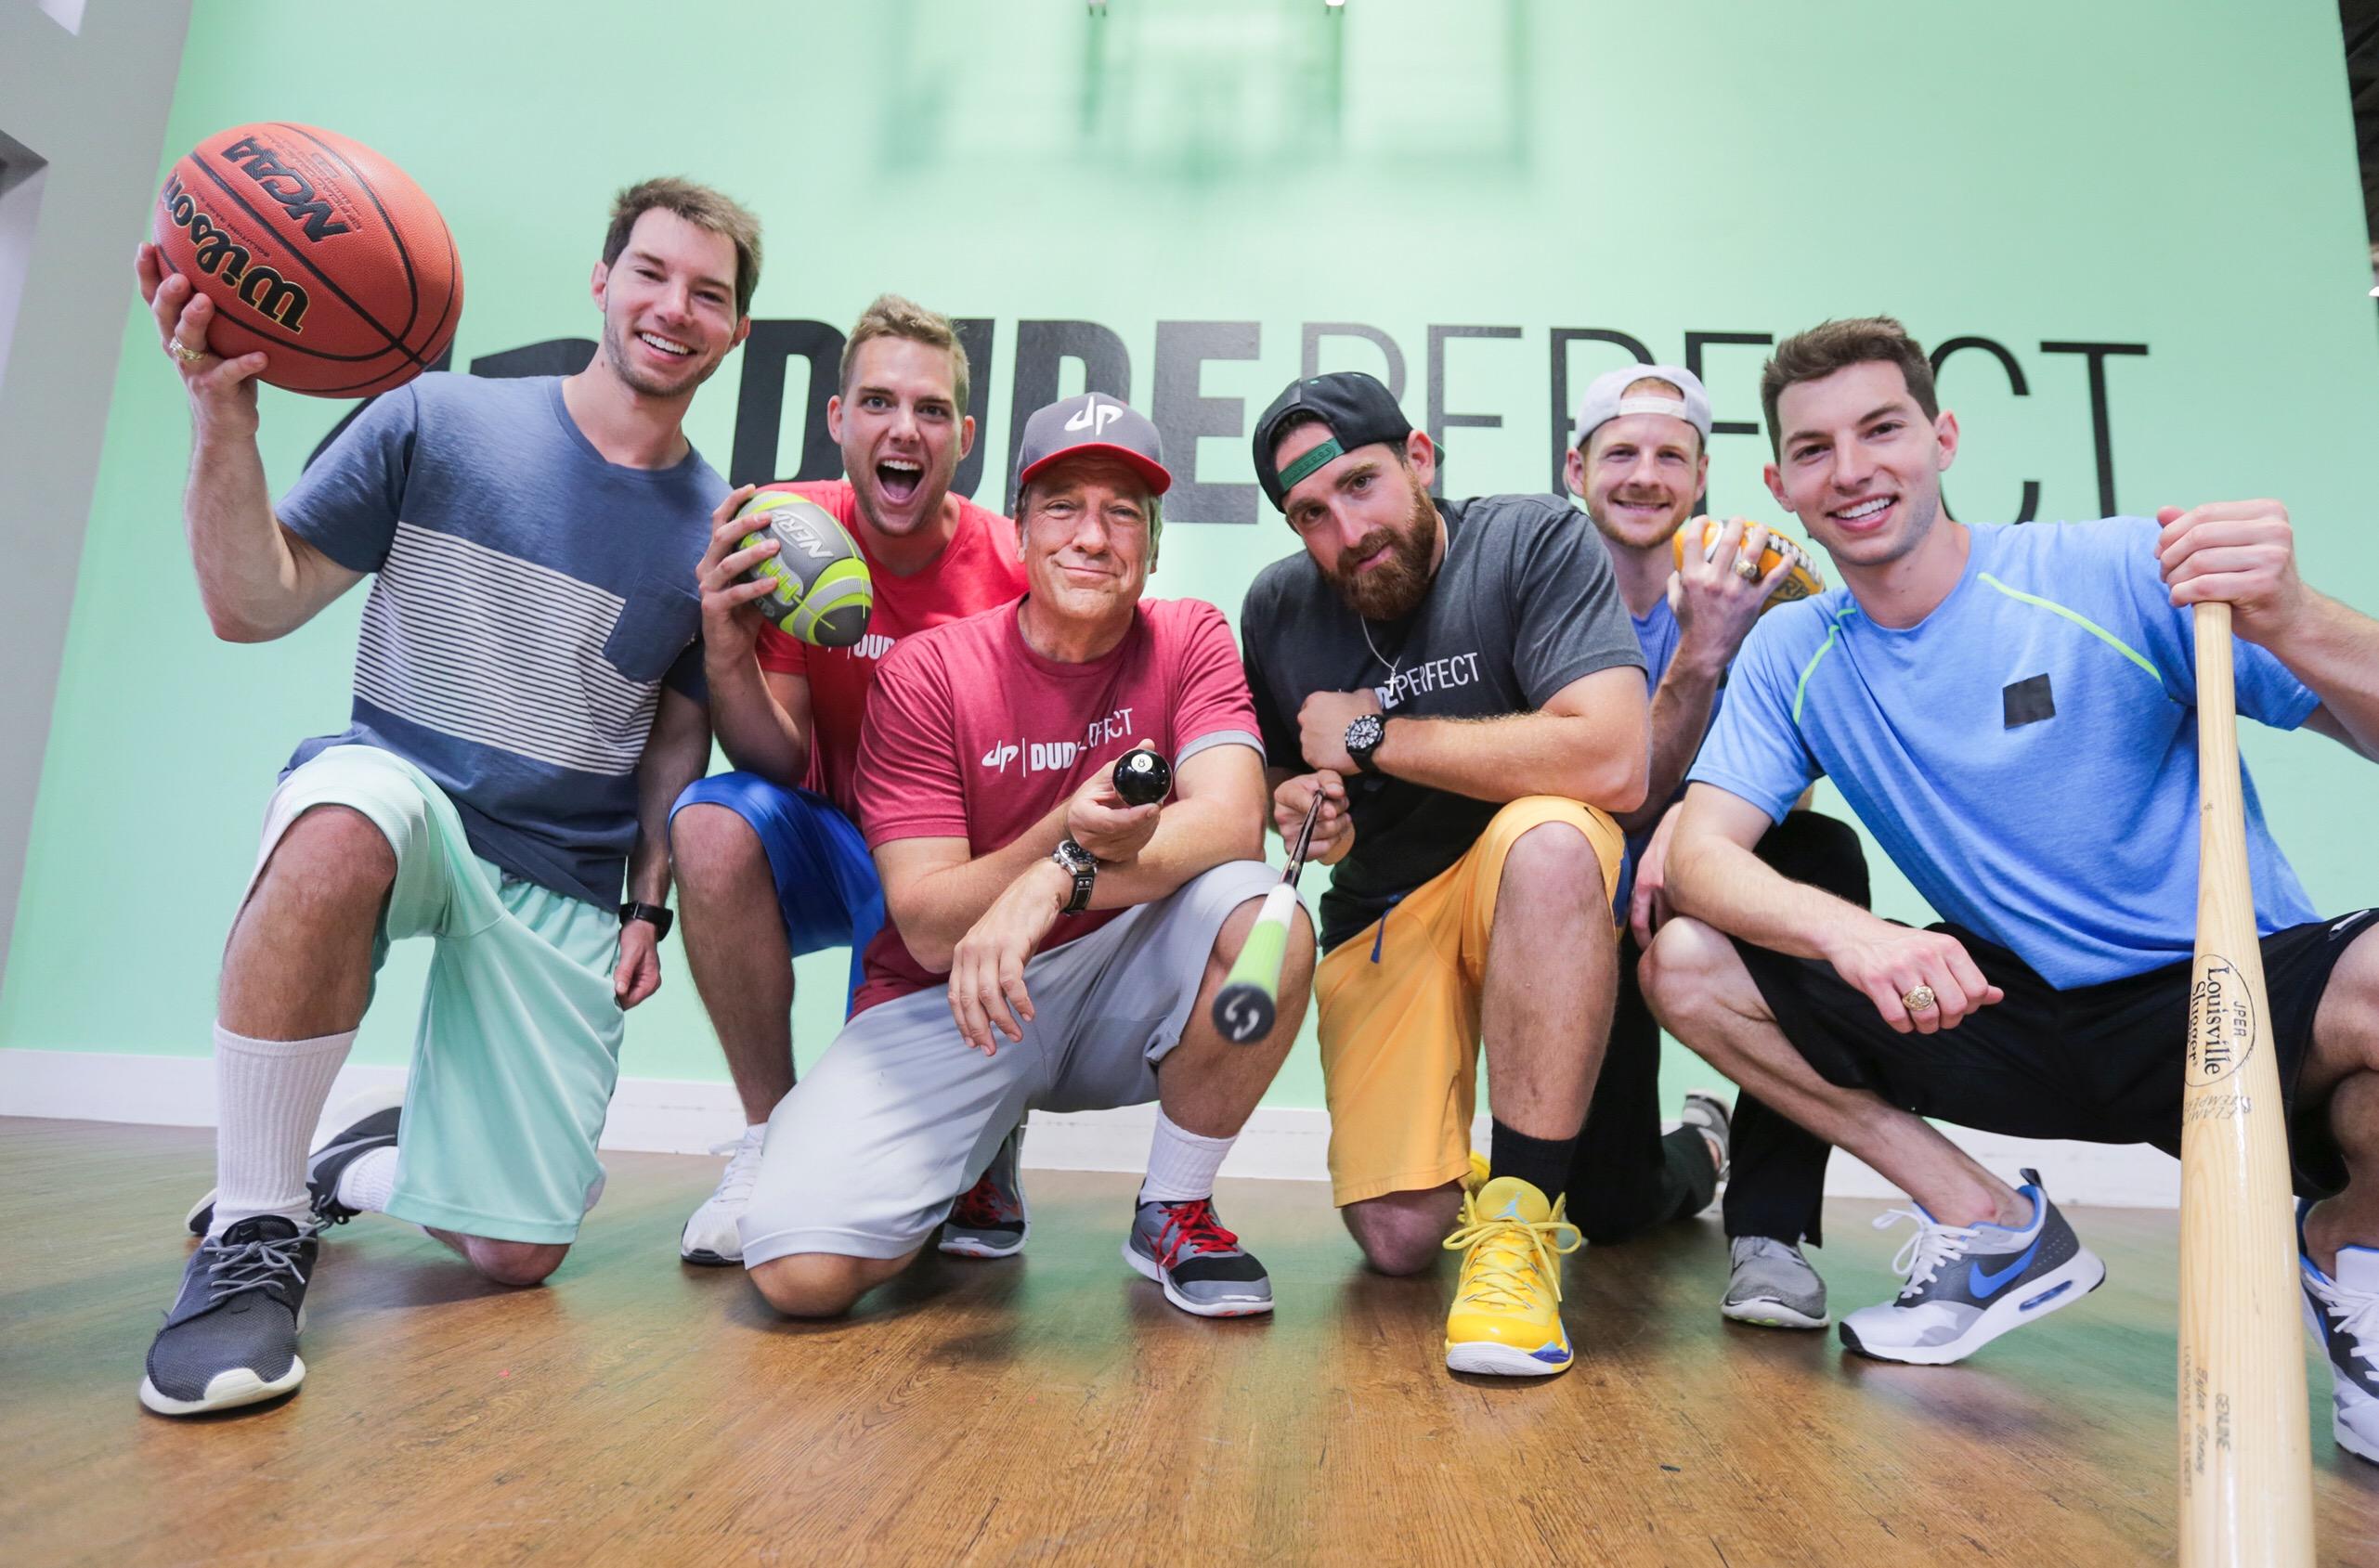 Dude Perfect Backgrounds